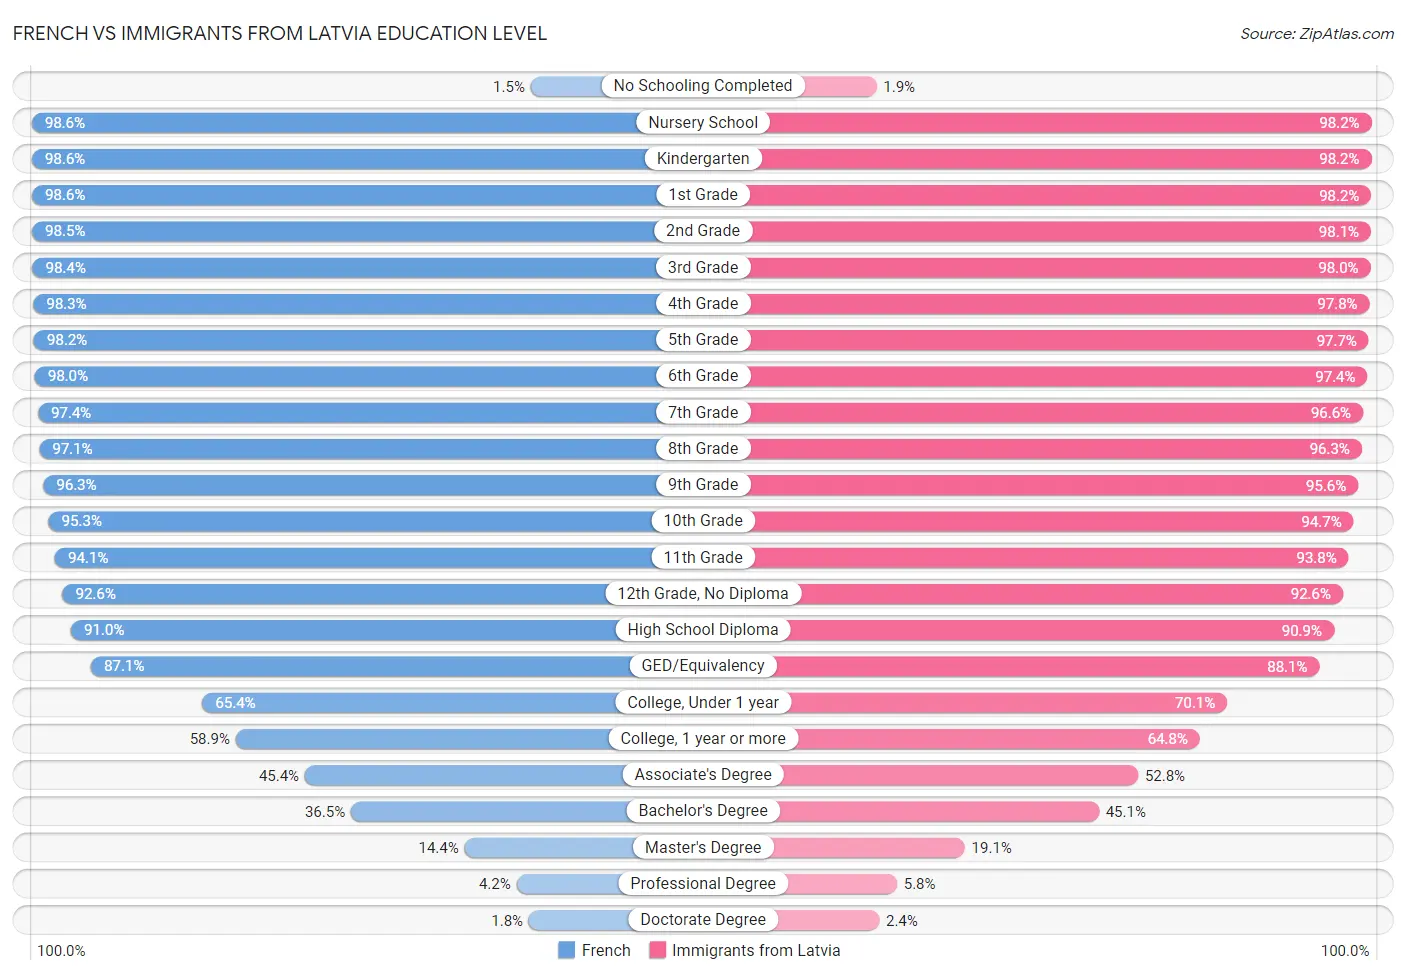 French vs Immigrants from Latvia Education Level